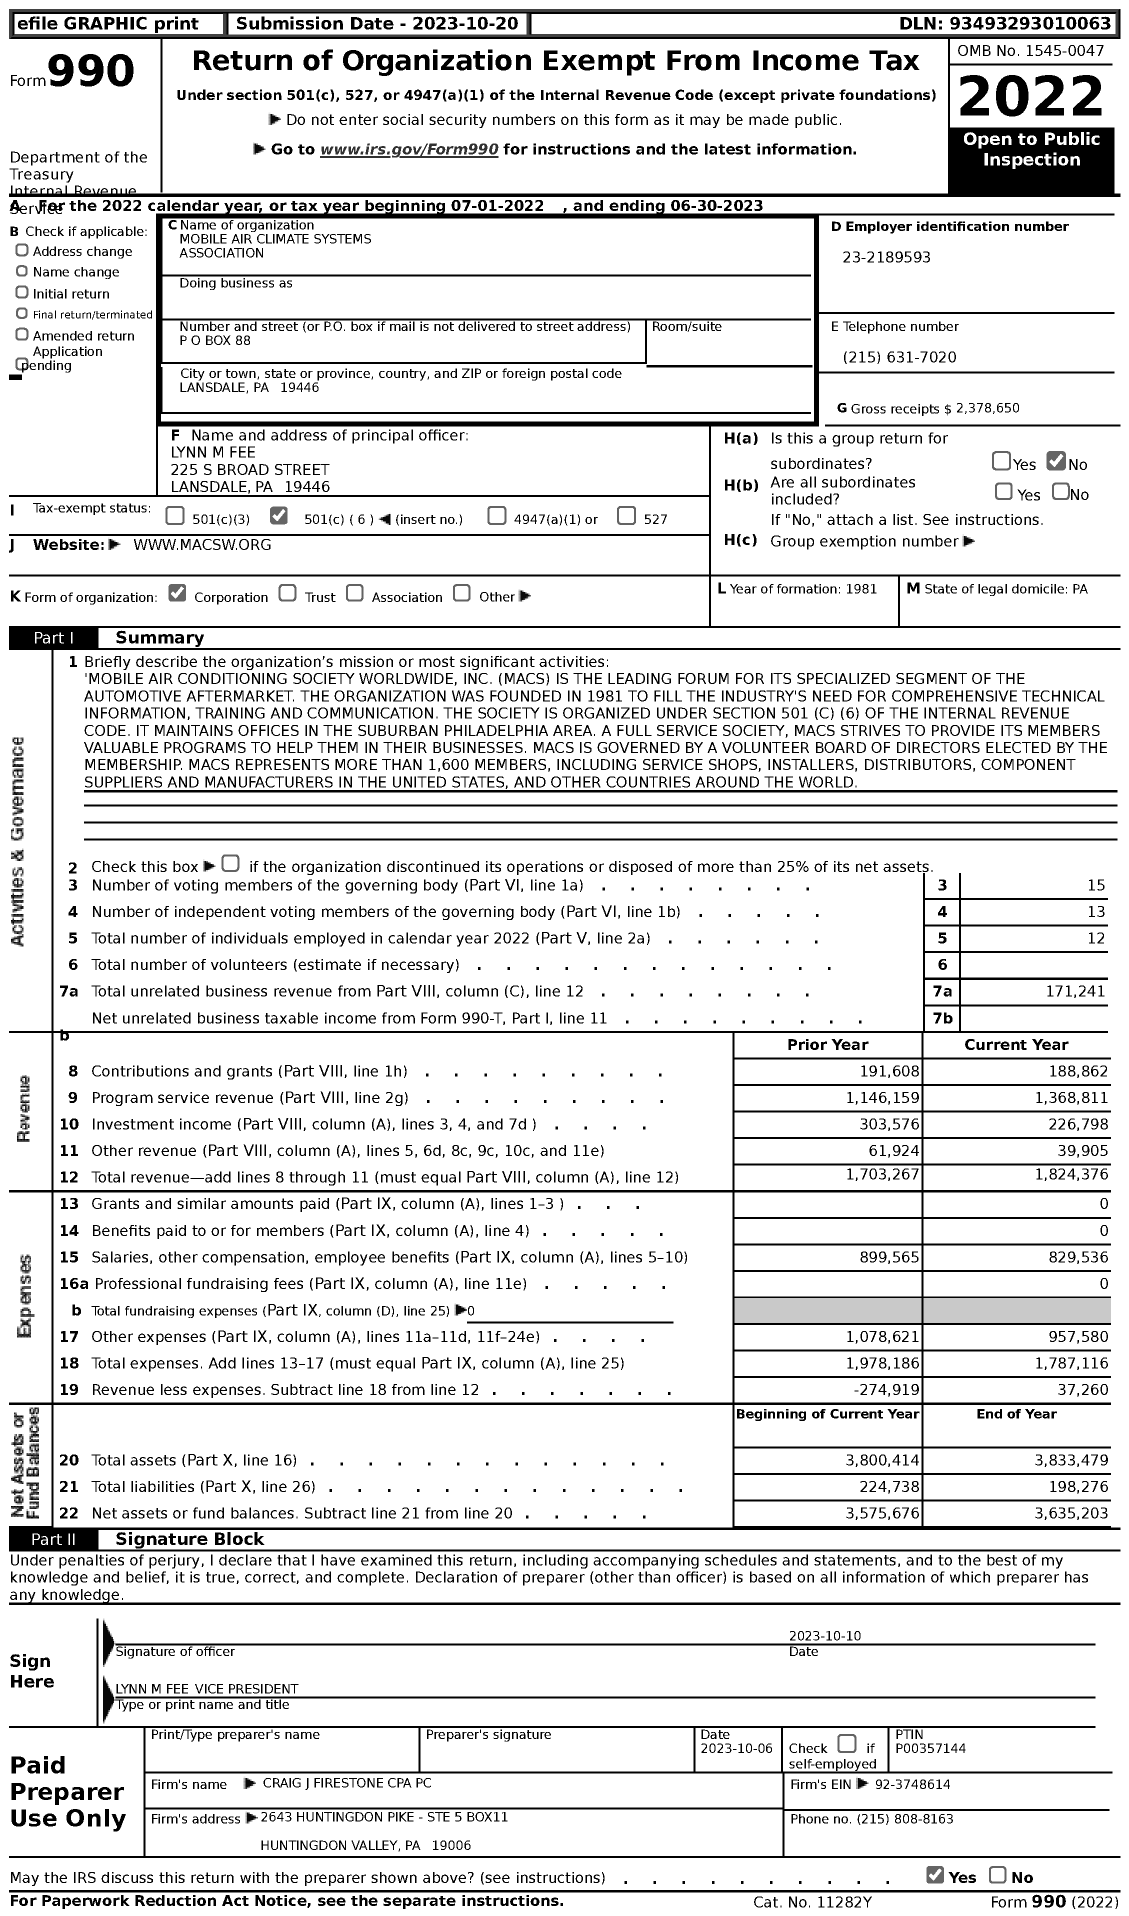 Image of first page of 2022 Form 990 for Mobile Air Climate Systems Association (MACS)